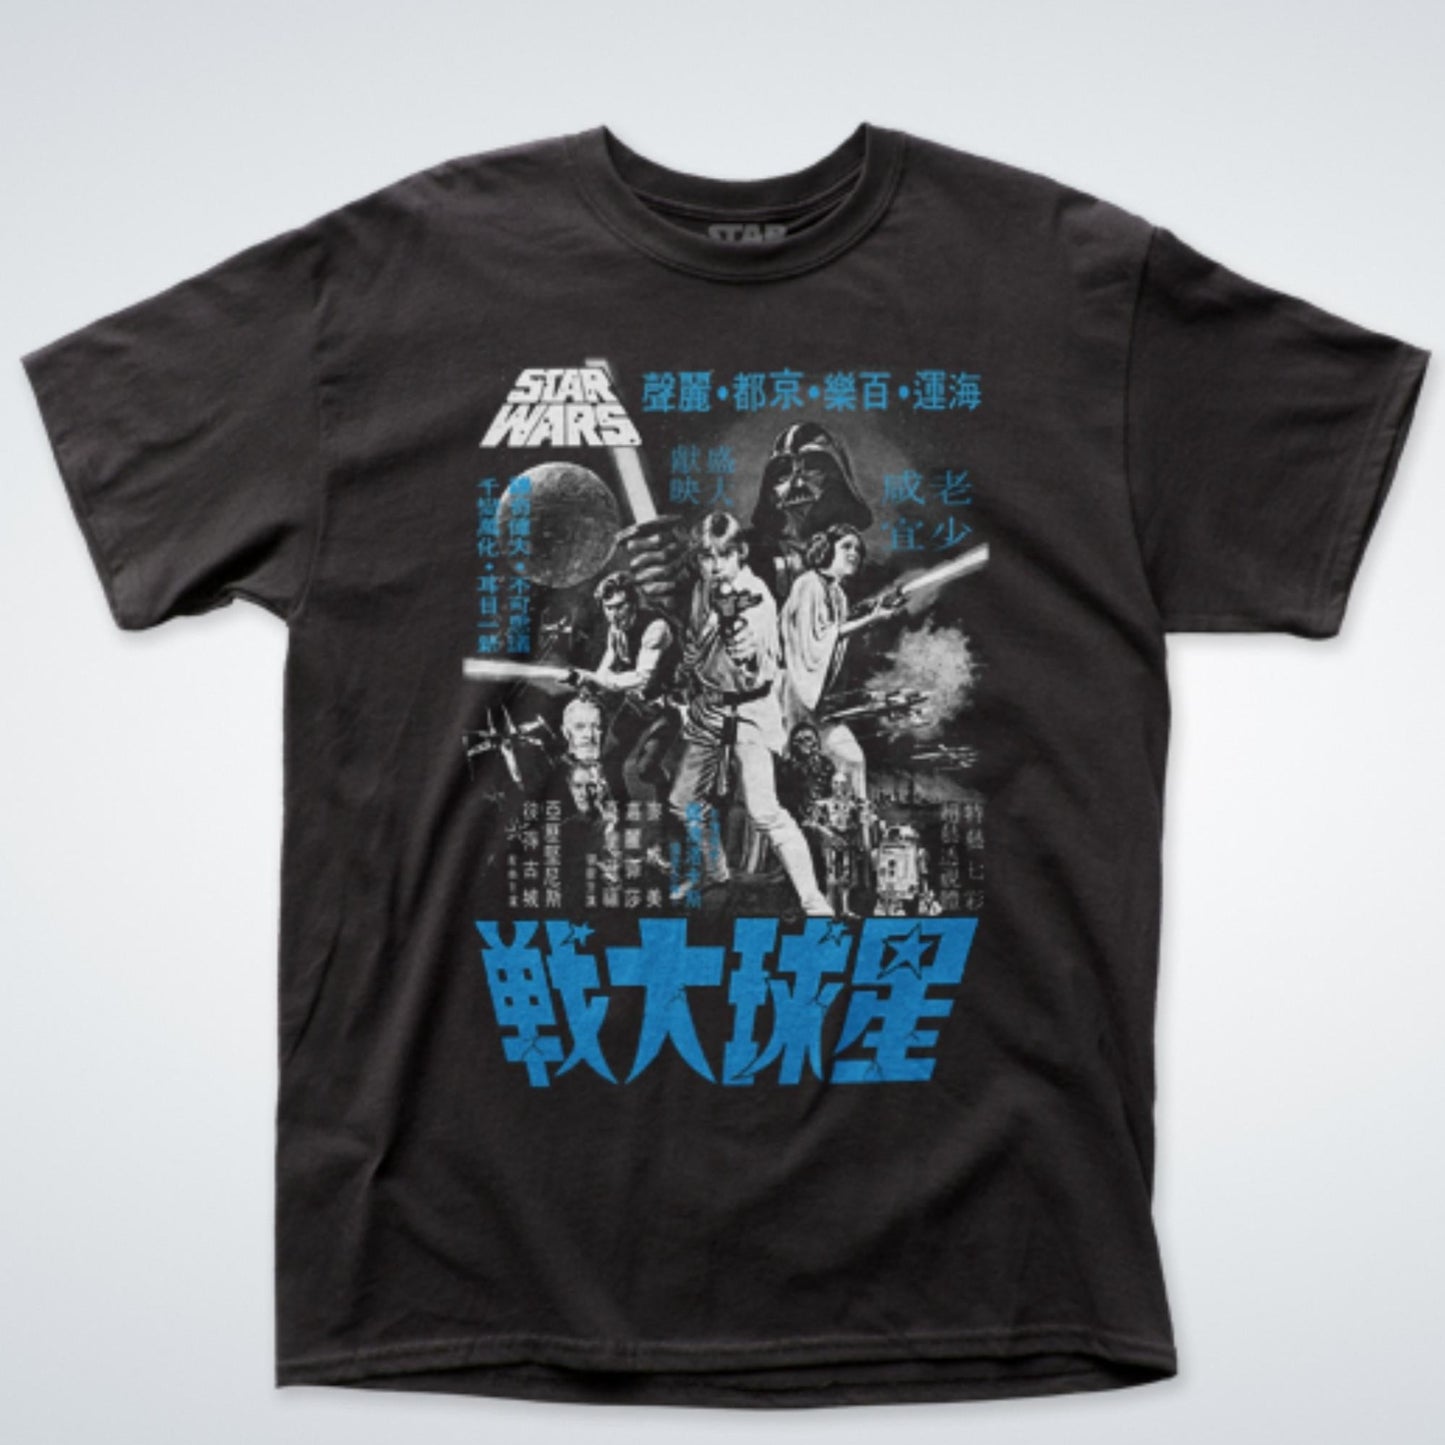 Load image into Gallery viewer, Star Wars Japanese Monochrome Black and Blue Unisex Shirt
